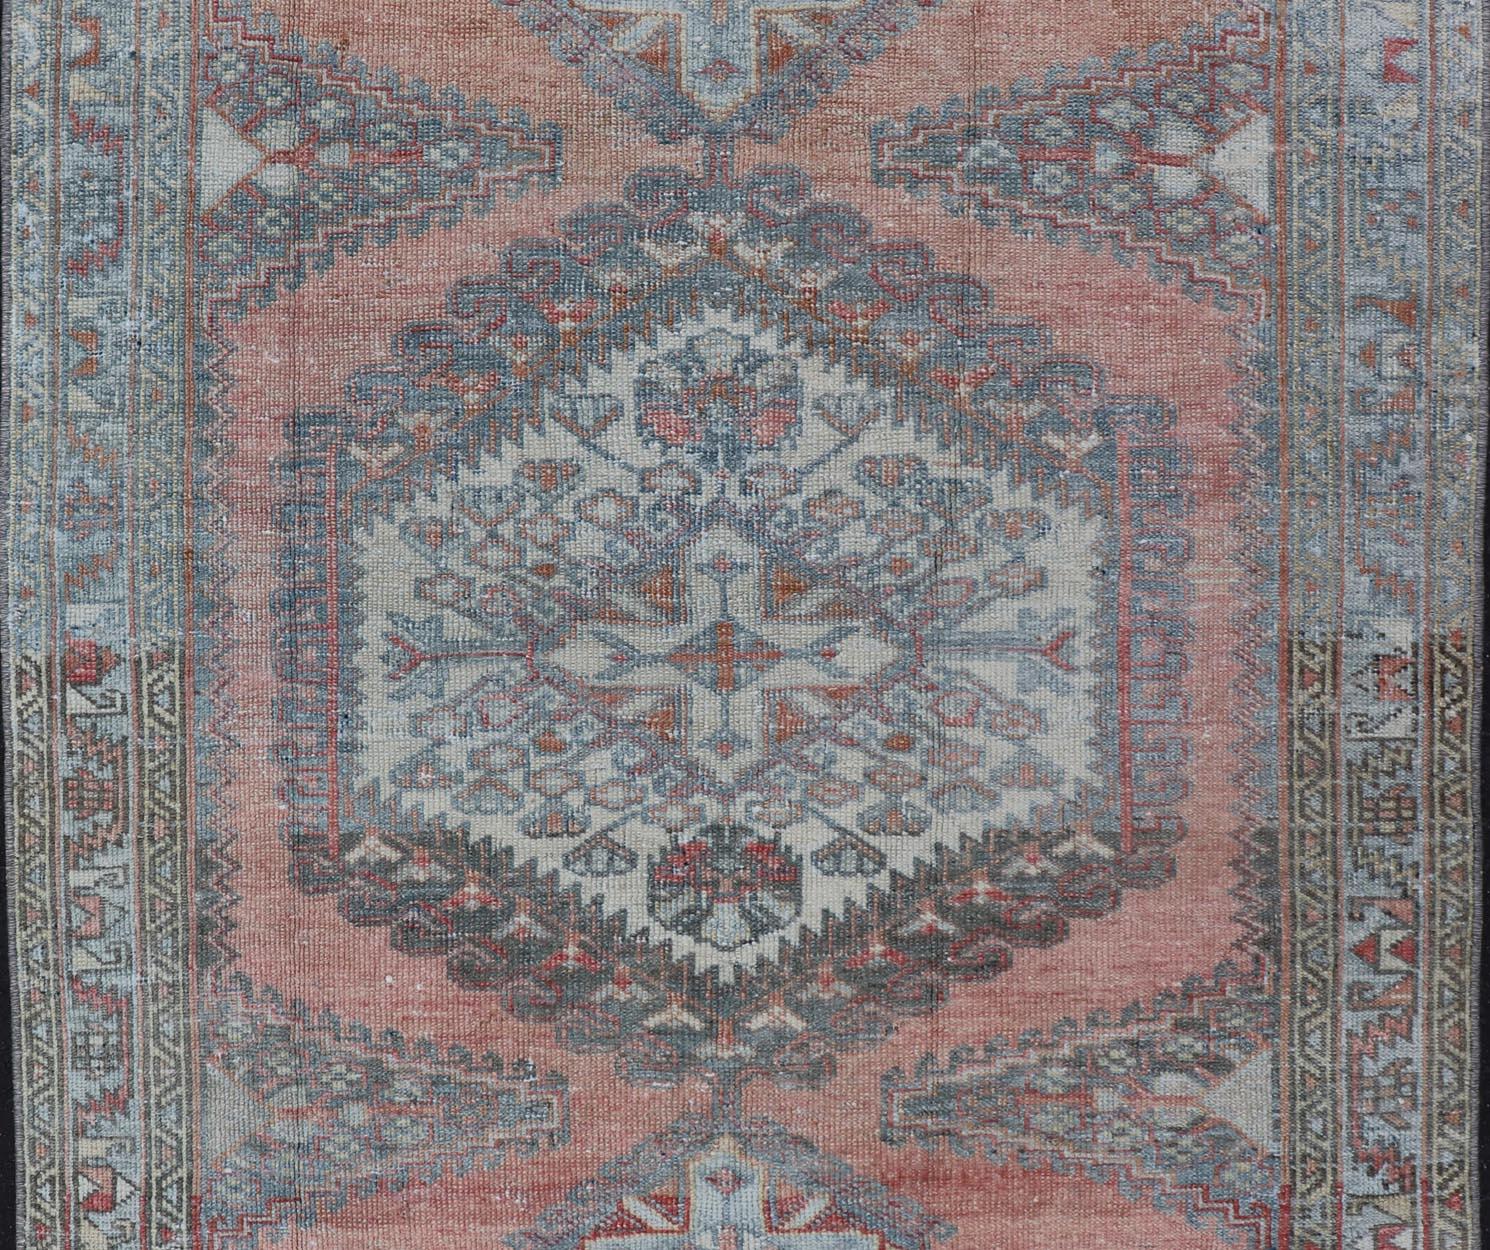 This vintage hand-knotted Persian Hamadan rug features a sub-geometric medallion design enclosed within a complementary, multi-tiered border. The rug has a bold design, however the piece is rendered in soft tones of salmon, blue and gray; making